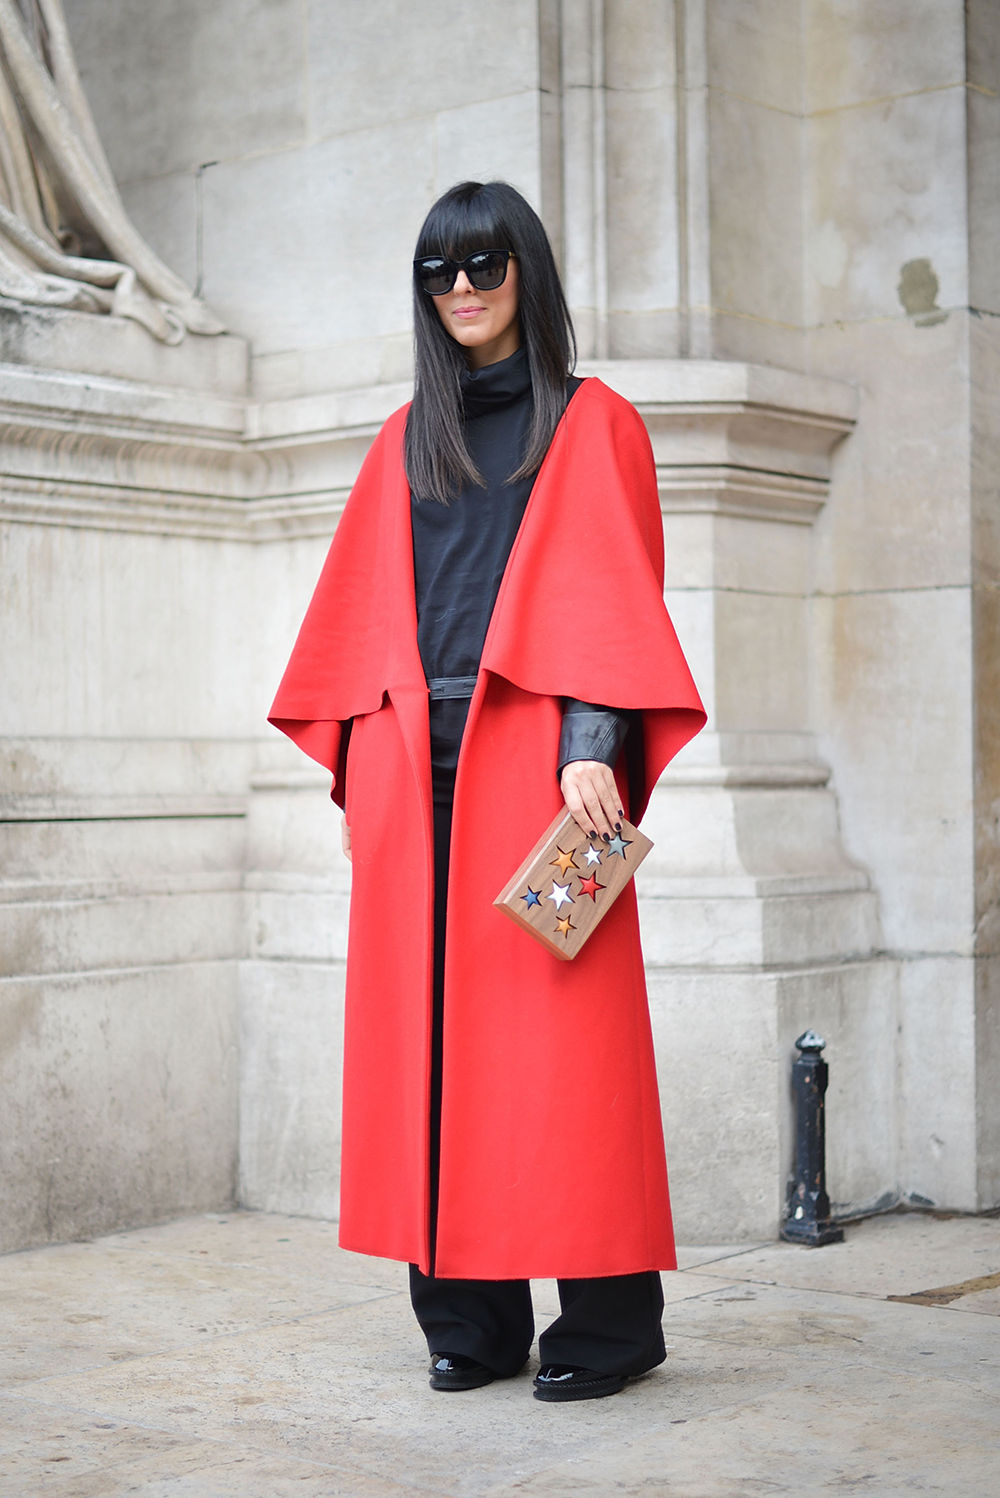 Laura Comolli poses wearing a Fatima Val coat and Lina Brax clutch before the Stella McCartney show. Photo / Getty Images